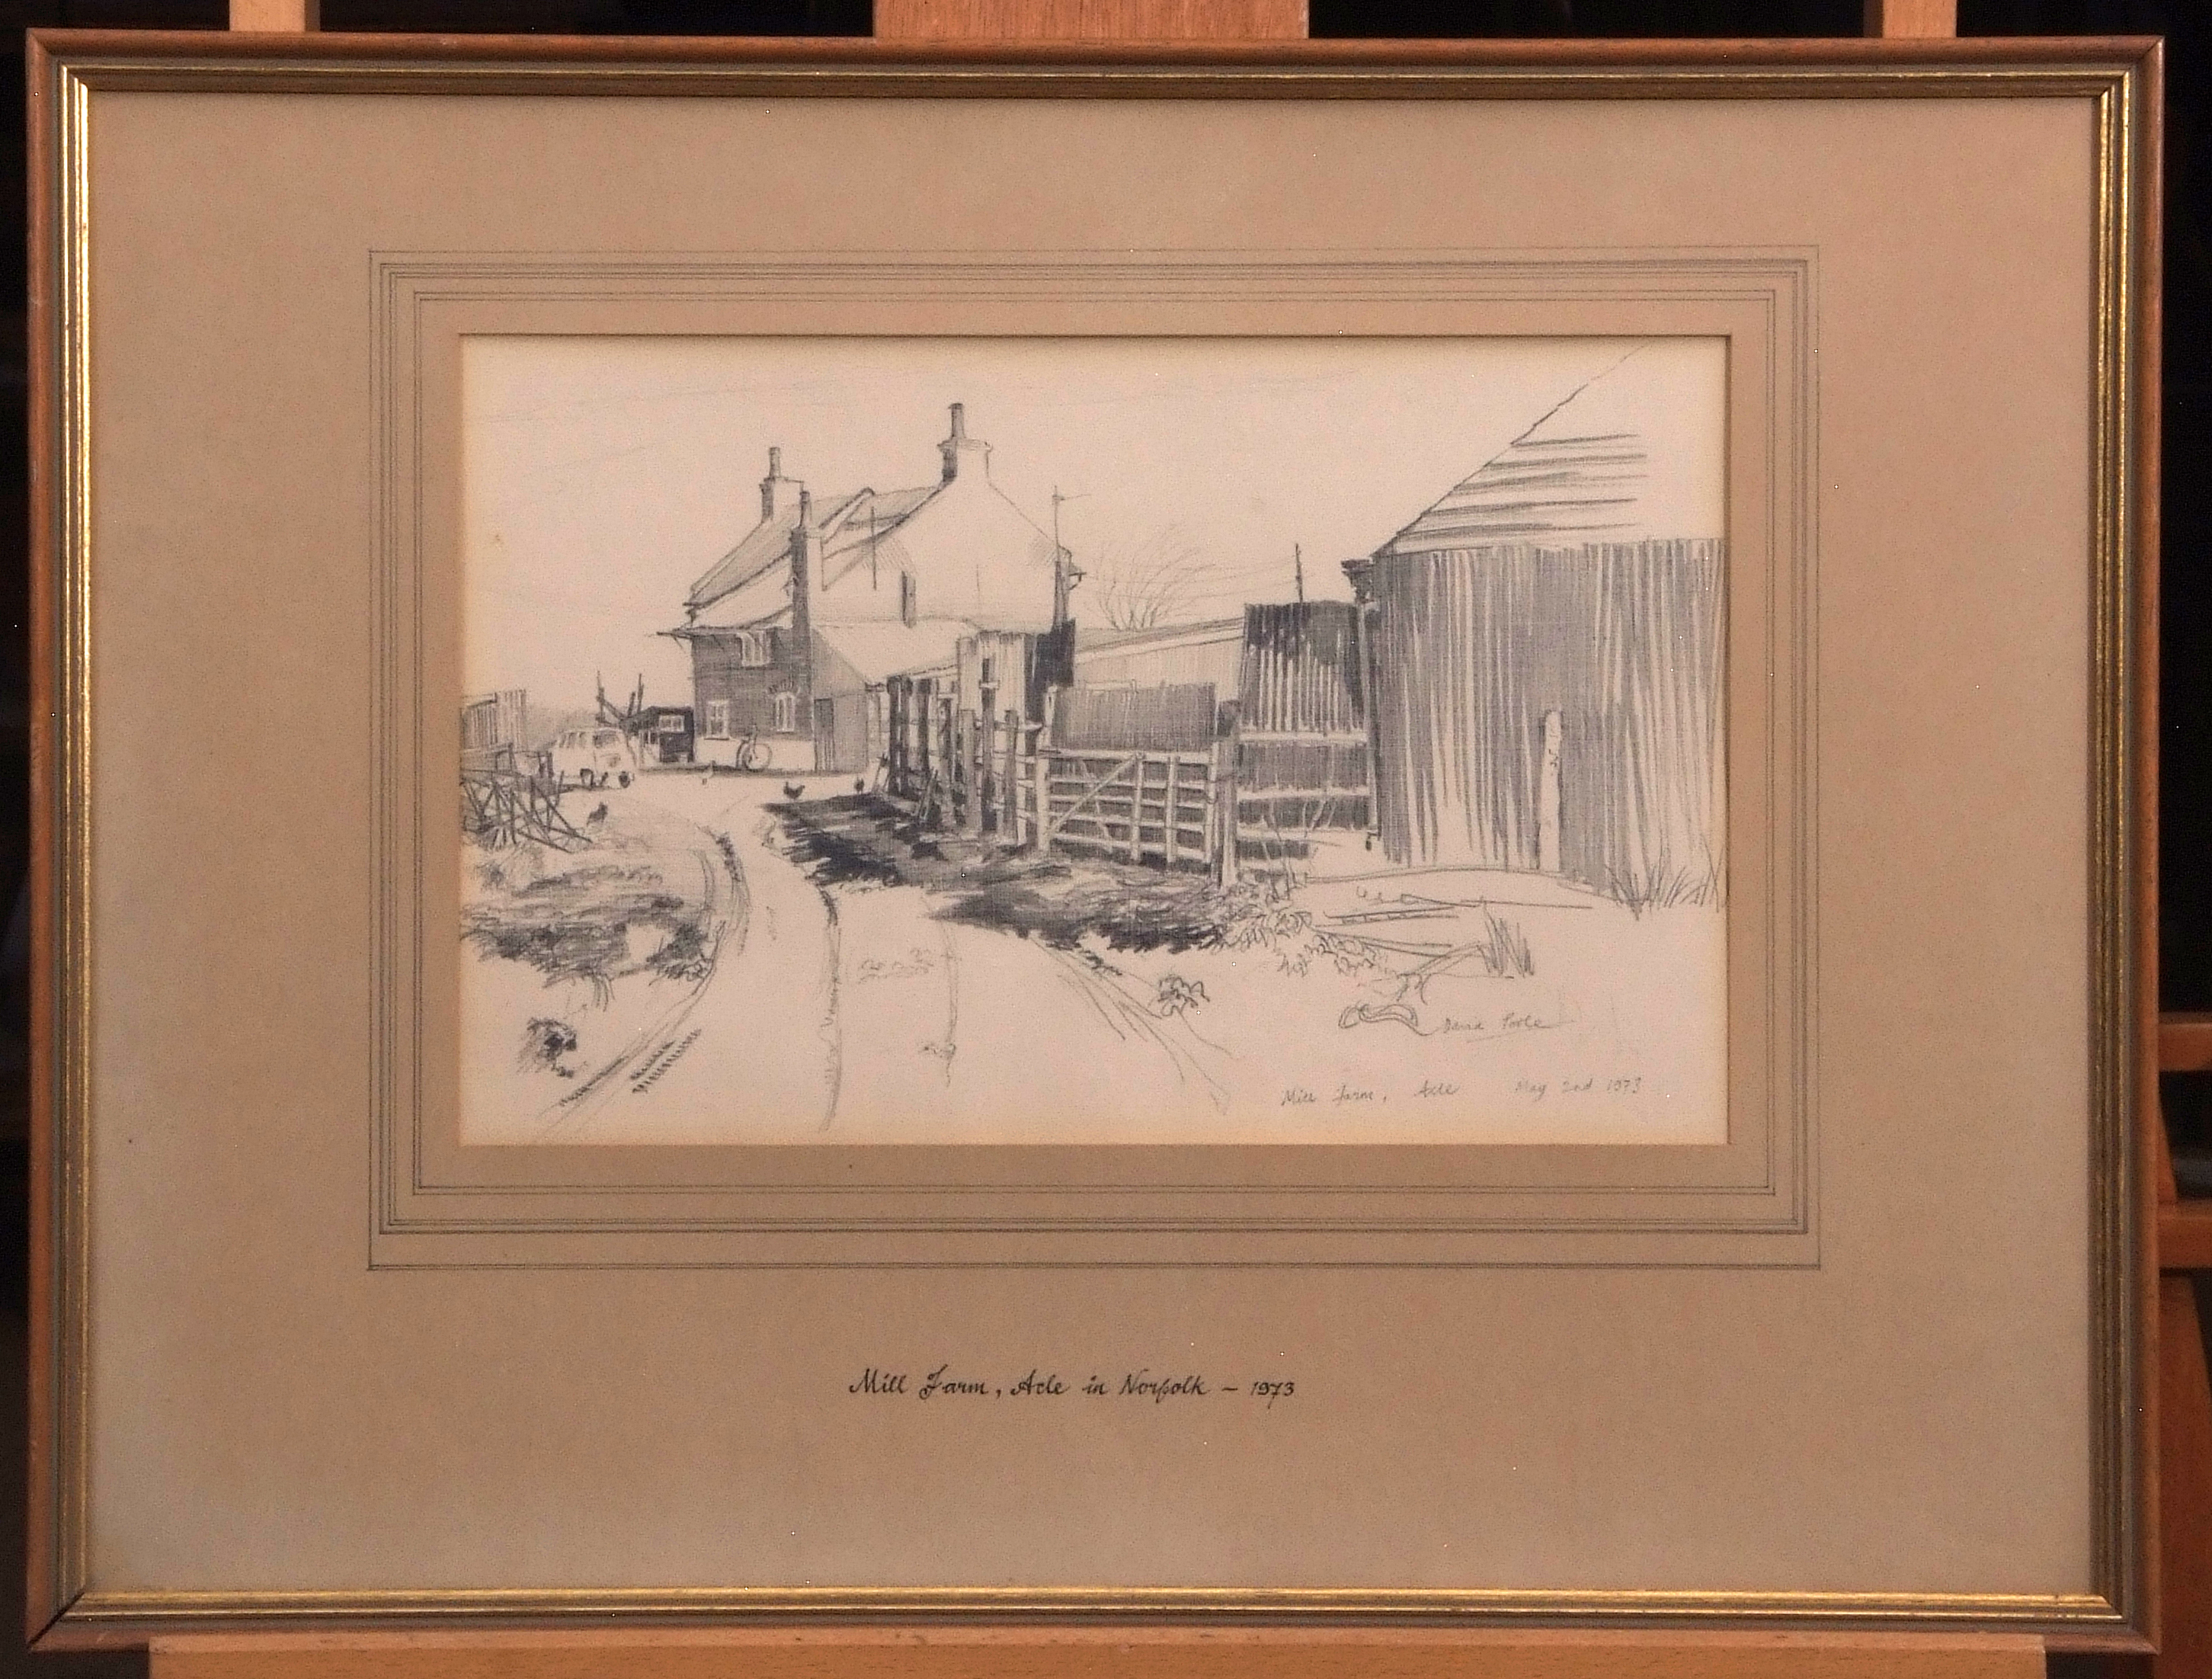 AR David Poole (1936-1995), "Mill Farm, Acle, May 2nd 1973", pencil drawing, signed and inscribed - Image 2 of 6